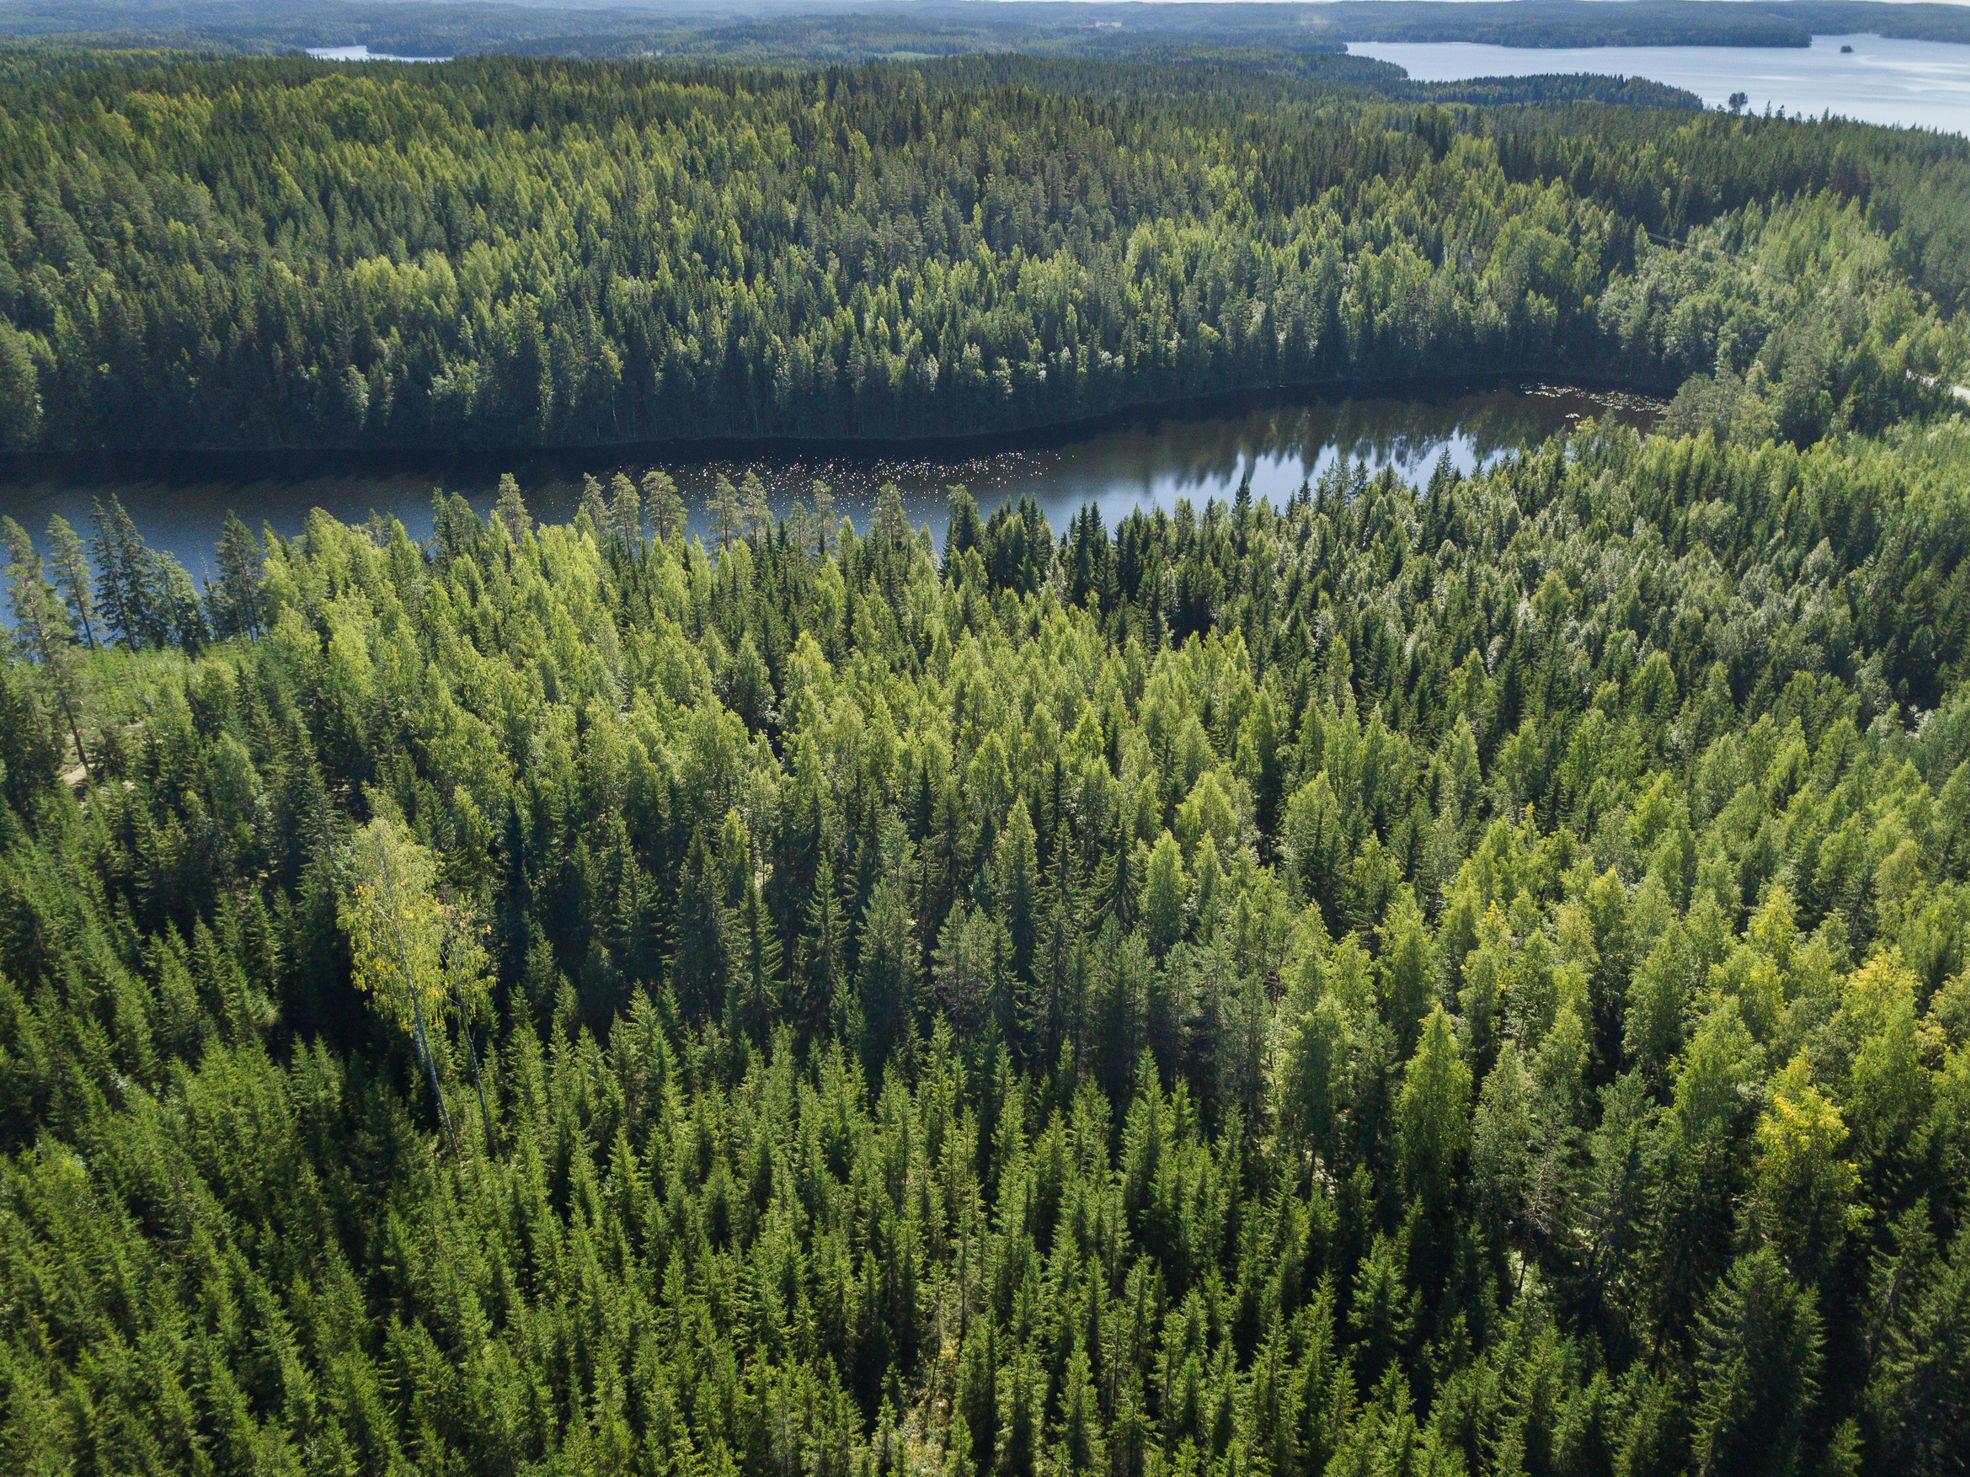 Finnish forest landscape, a seedling stand in the foreground.